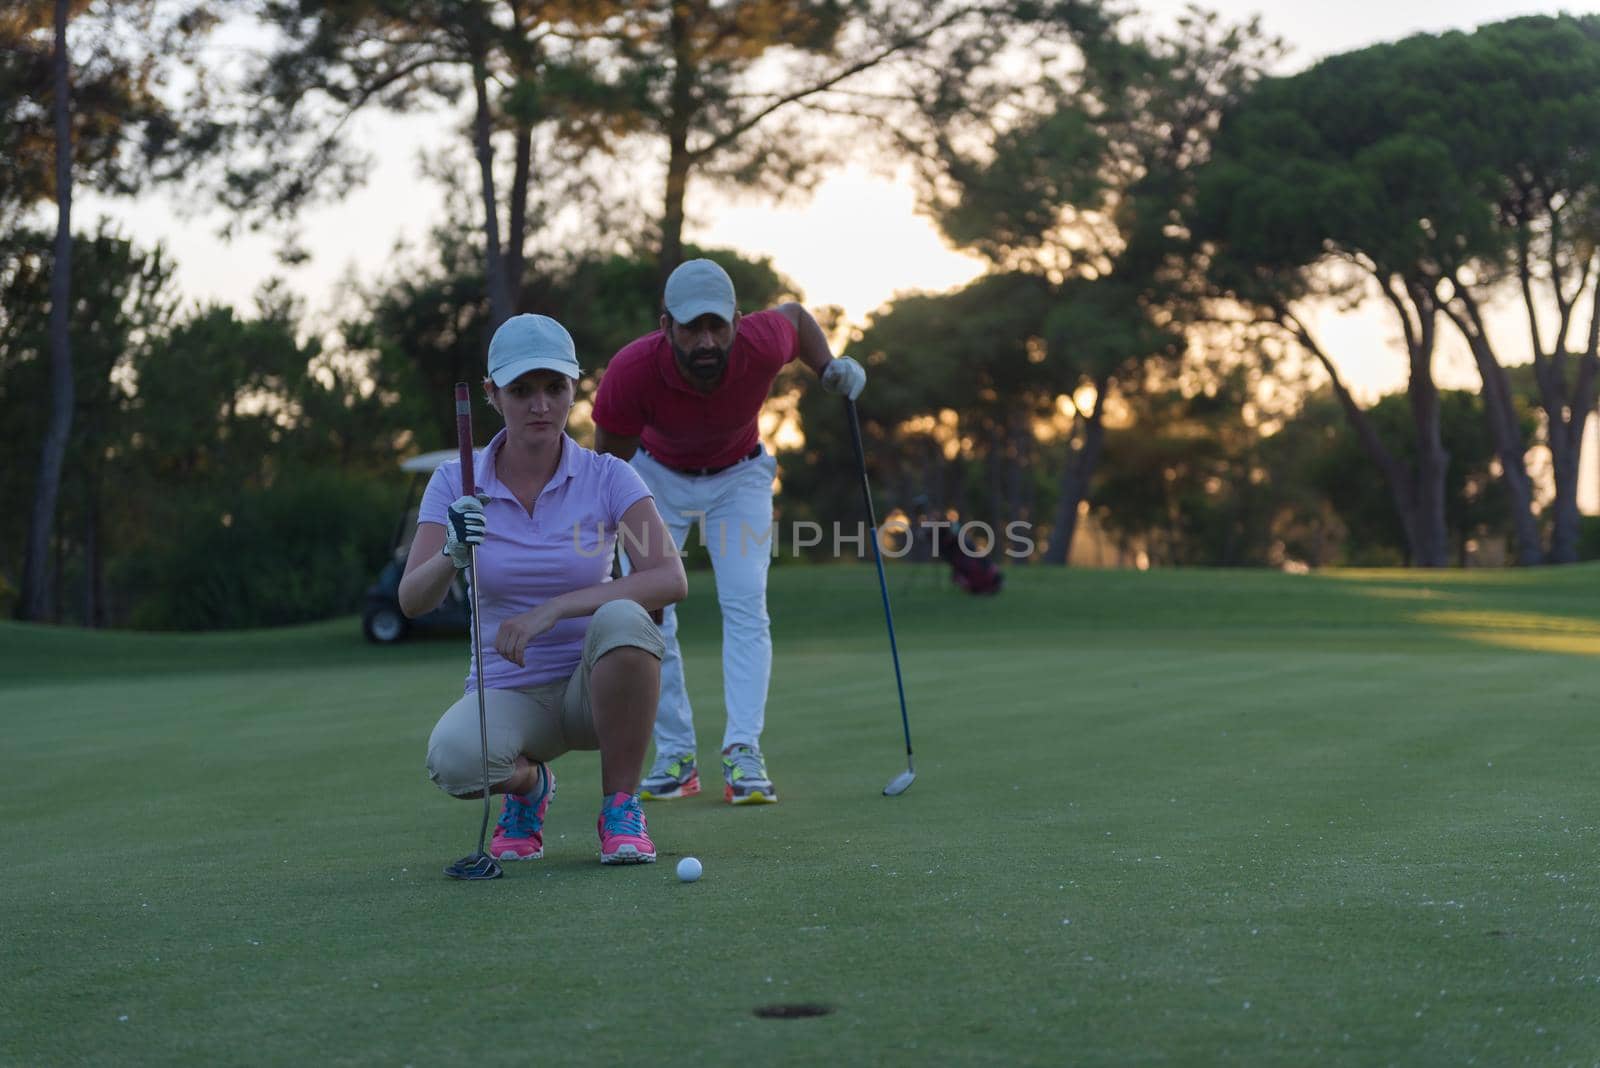 couple on golf course at sunset by dotshock